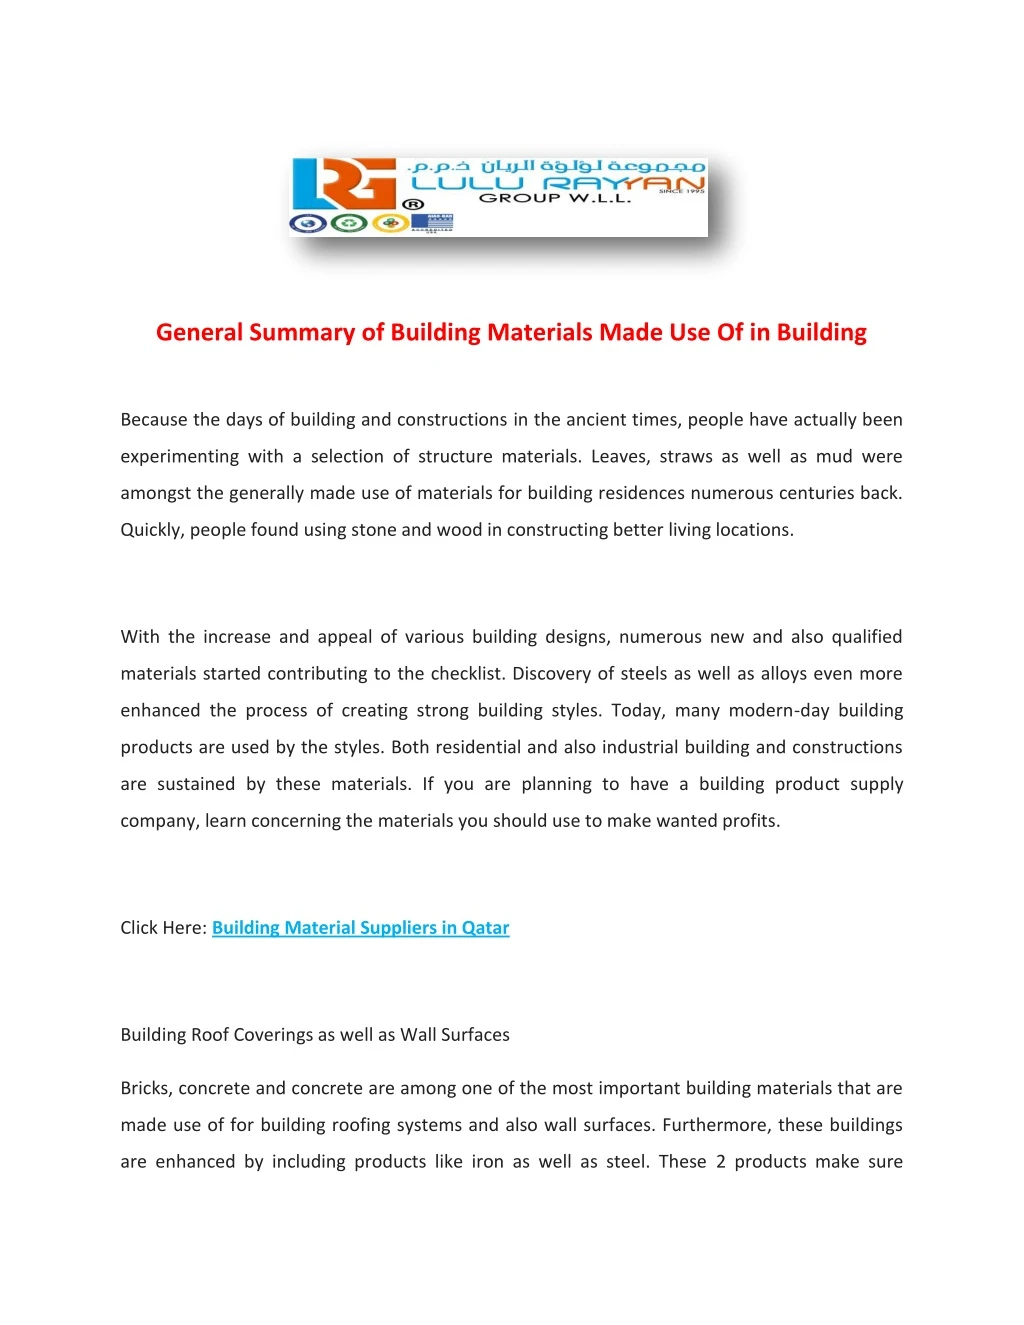 general summary of building materials made